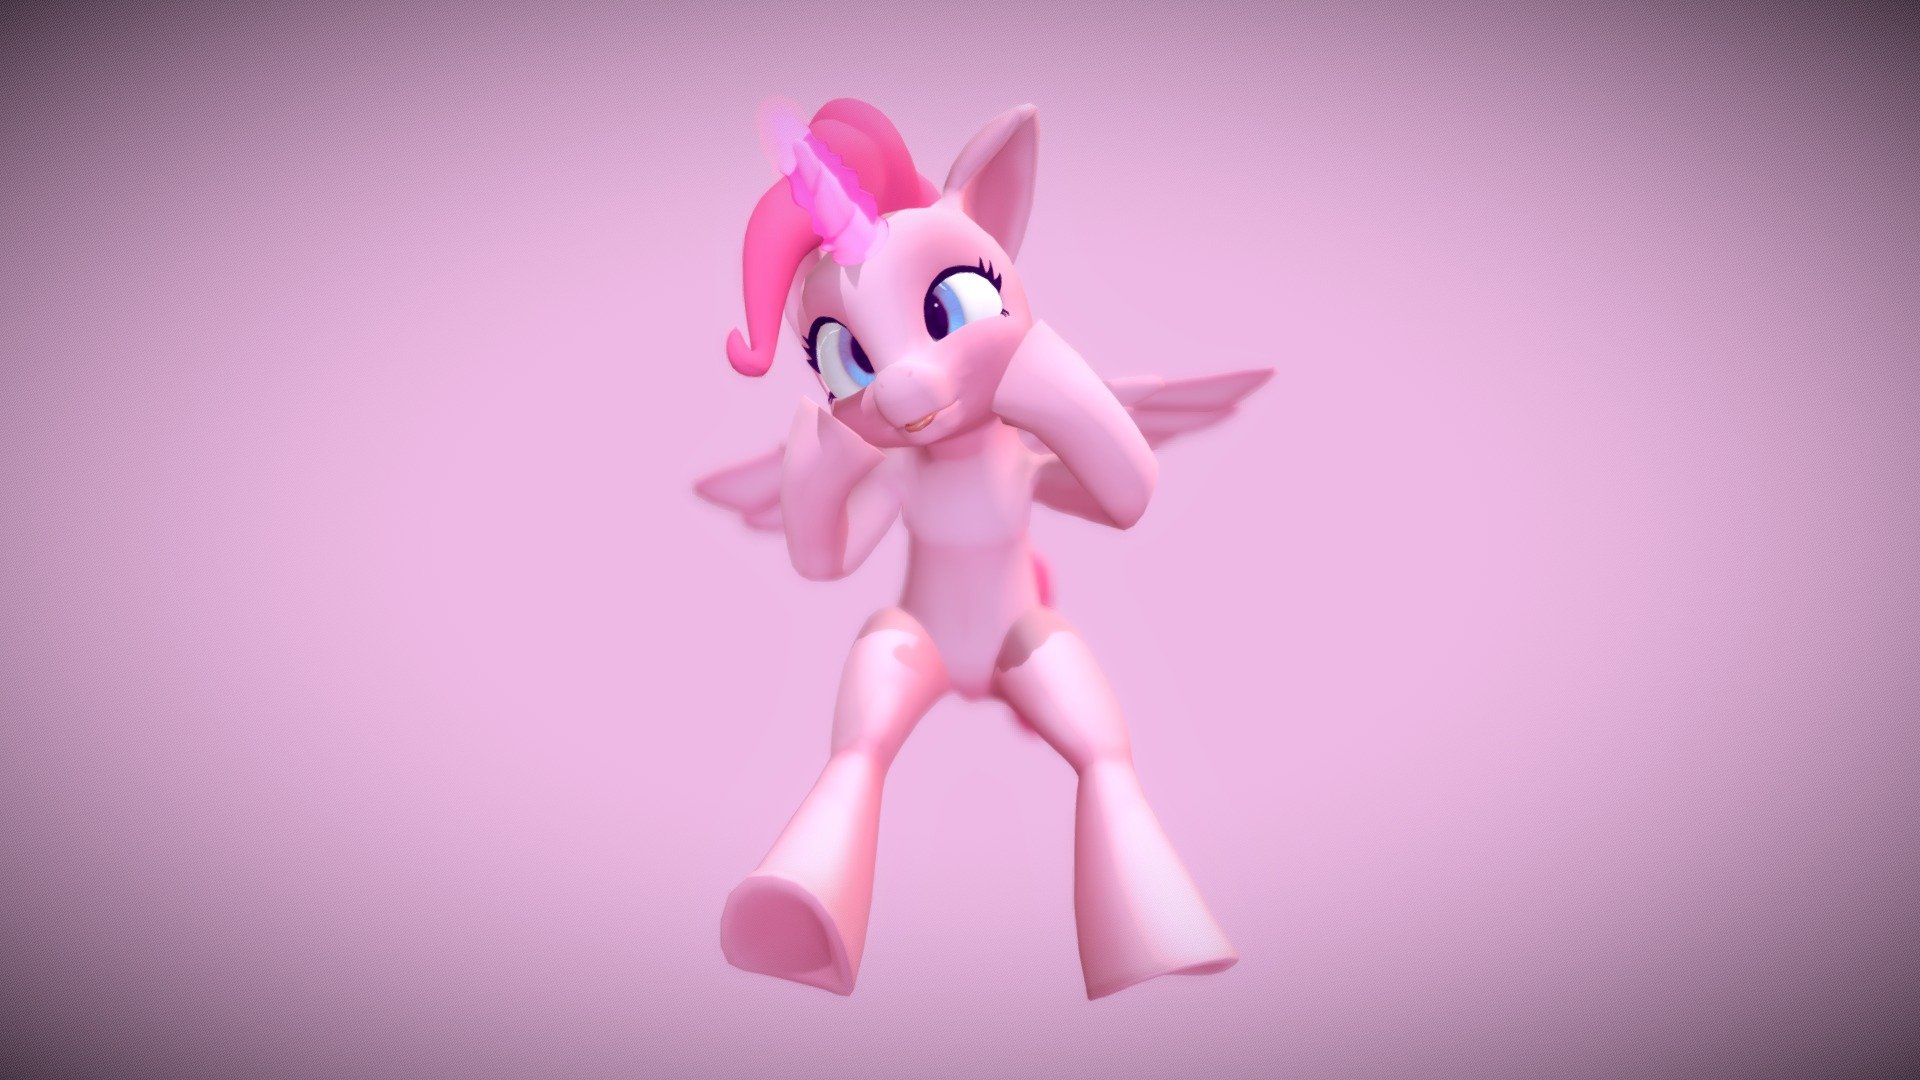 an avatar I made for VRChat
UPDATED VERSION: https://skfb.ly/o8YHC 

more info on my twitter: https://twitter.com/VirtualKeni - Bipedal Pony (outdated) - 3D model by VirtualKeni 3d model